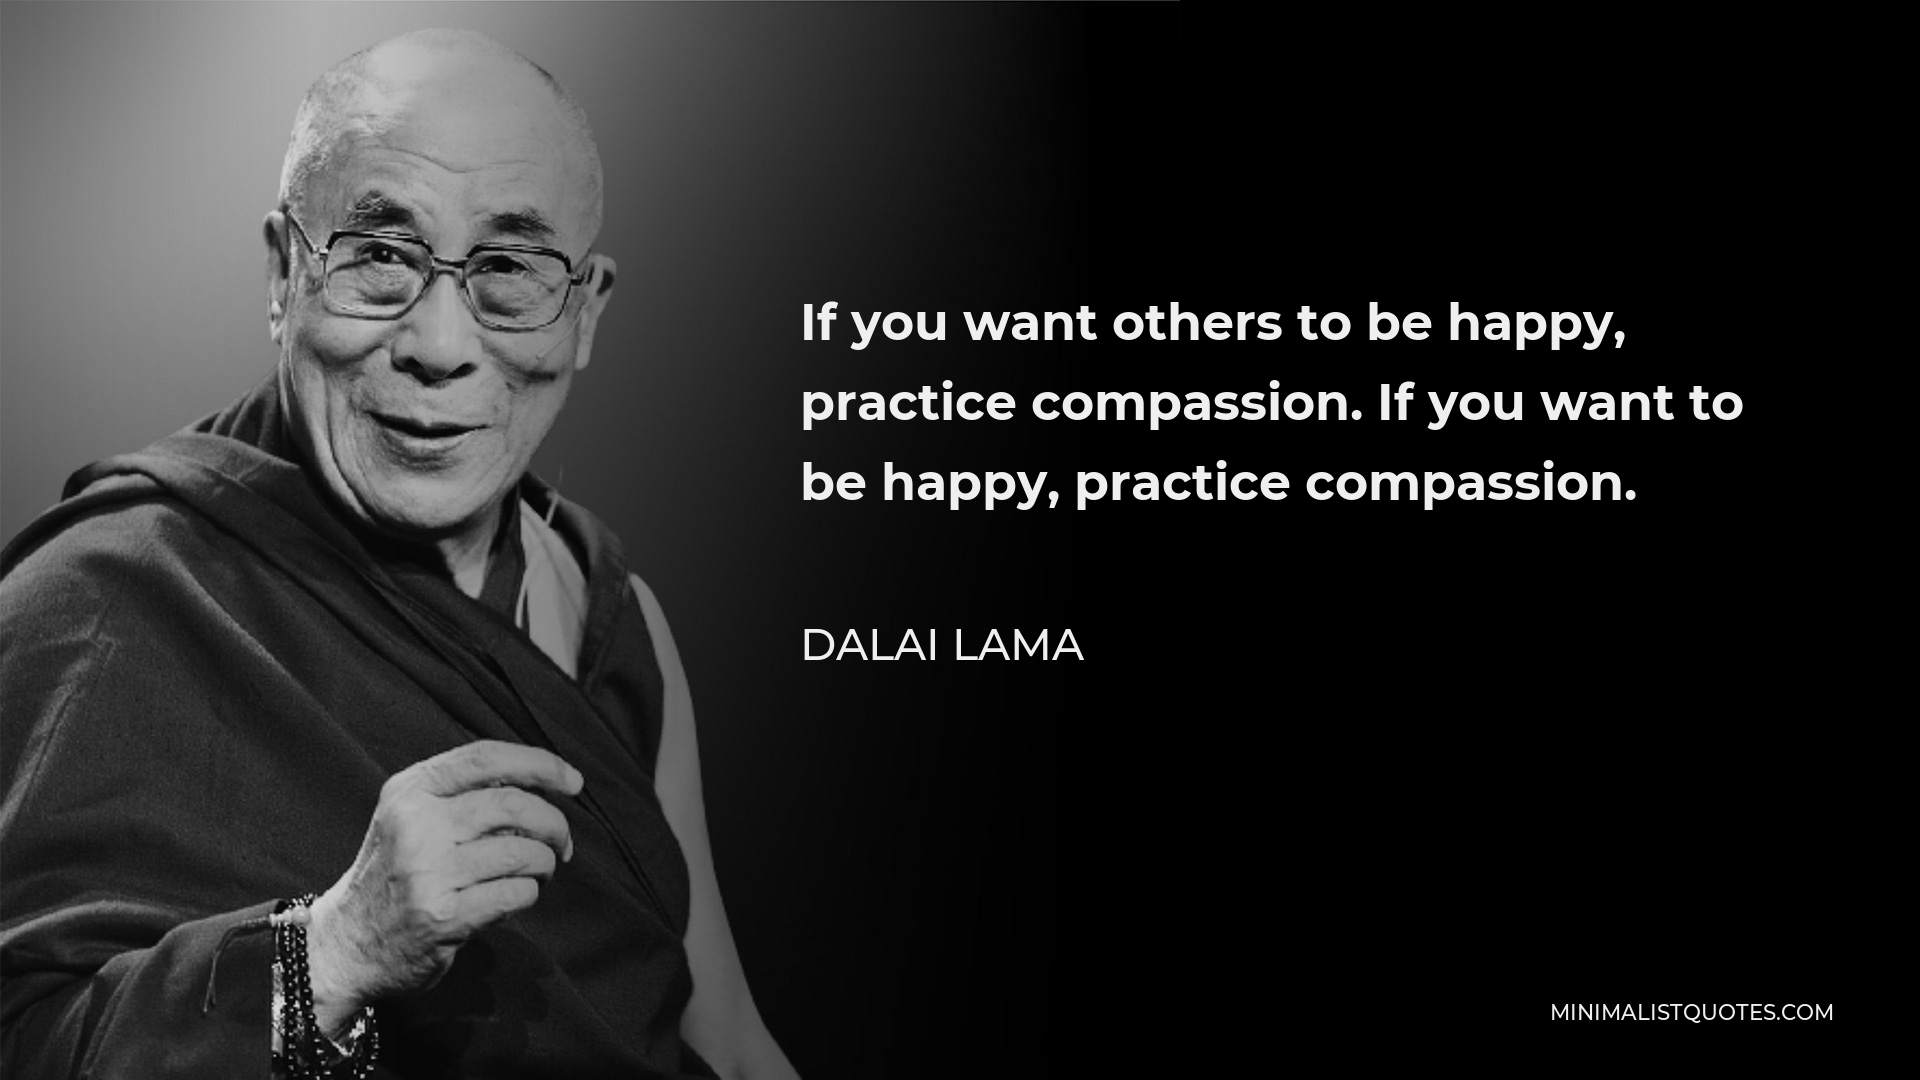 Dalai Lama Quote - If you want others to be happy, practice compassion. If you want to be happy, practice compassion.